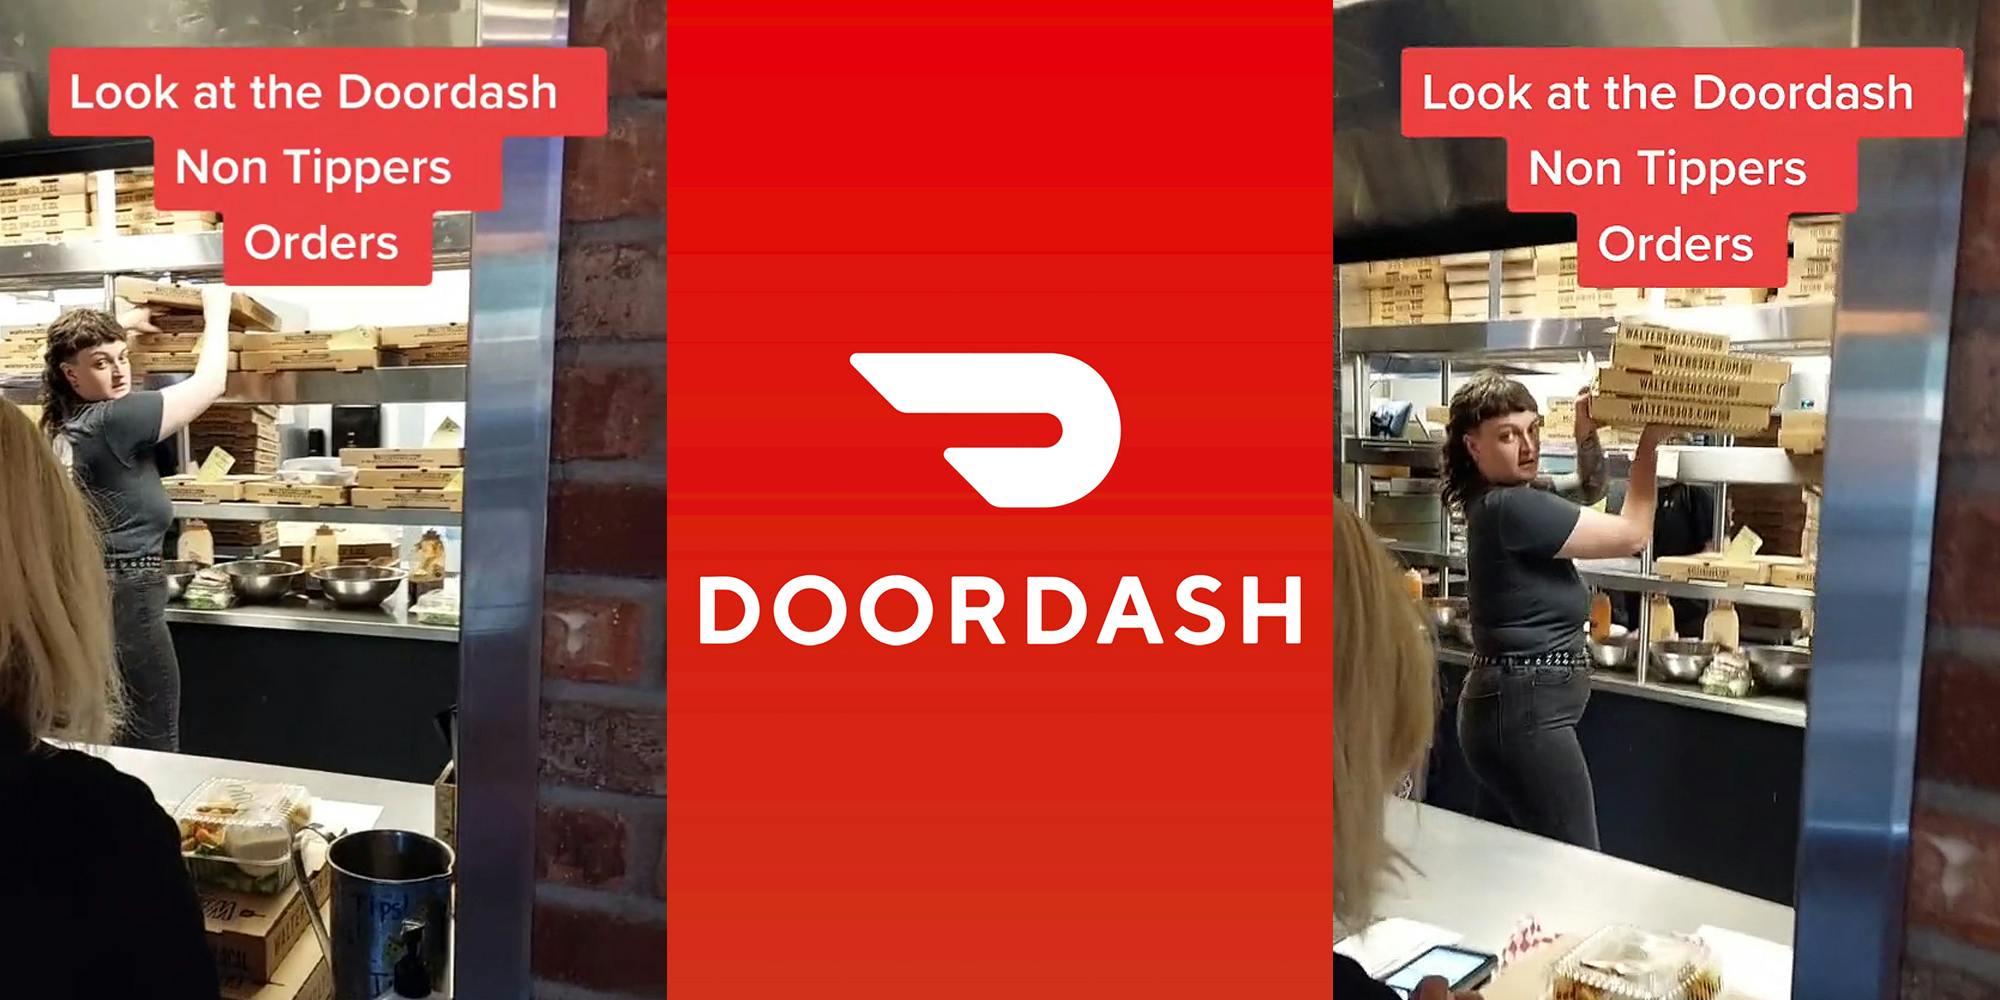 ‘If it’s under $10, I’m not taking it’: DoorDash driver shows piles of non-tippers’ pizza boxes, sparking debate